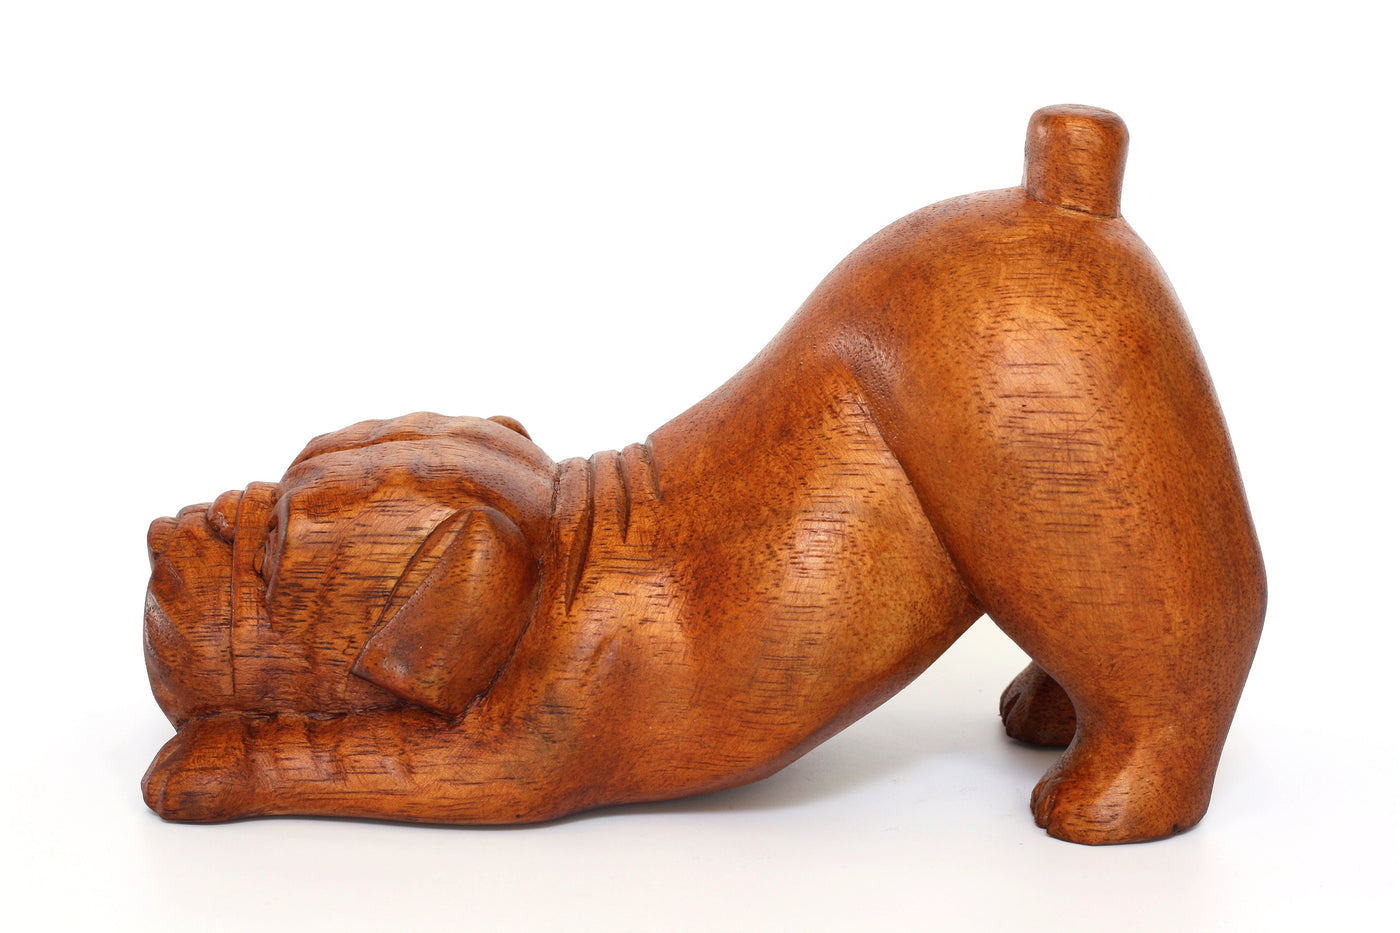 Wooden Hand Carved Crouching English Bulldog Statue Figurine Sculpture Art Decorative Home Decor Accent Handmade Handcrafted Wood Decoration Gift Dog